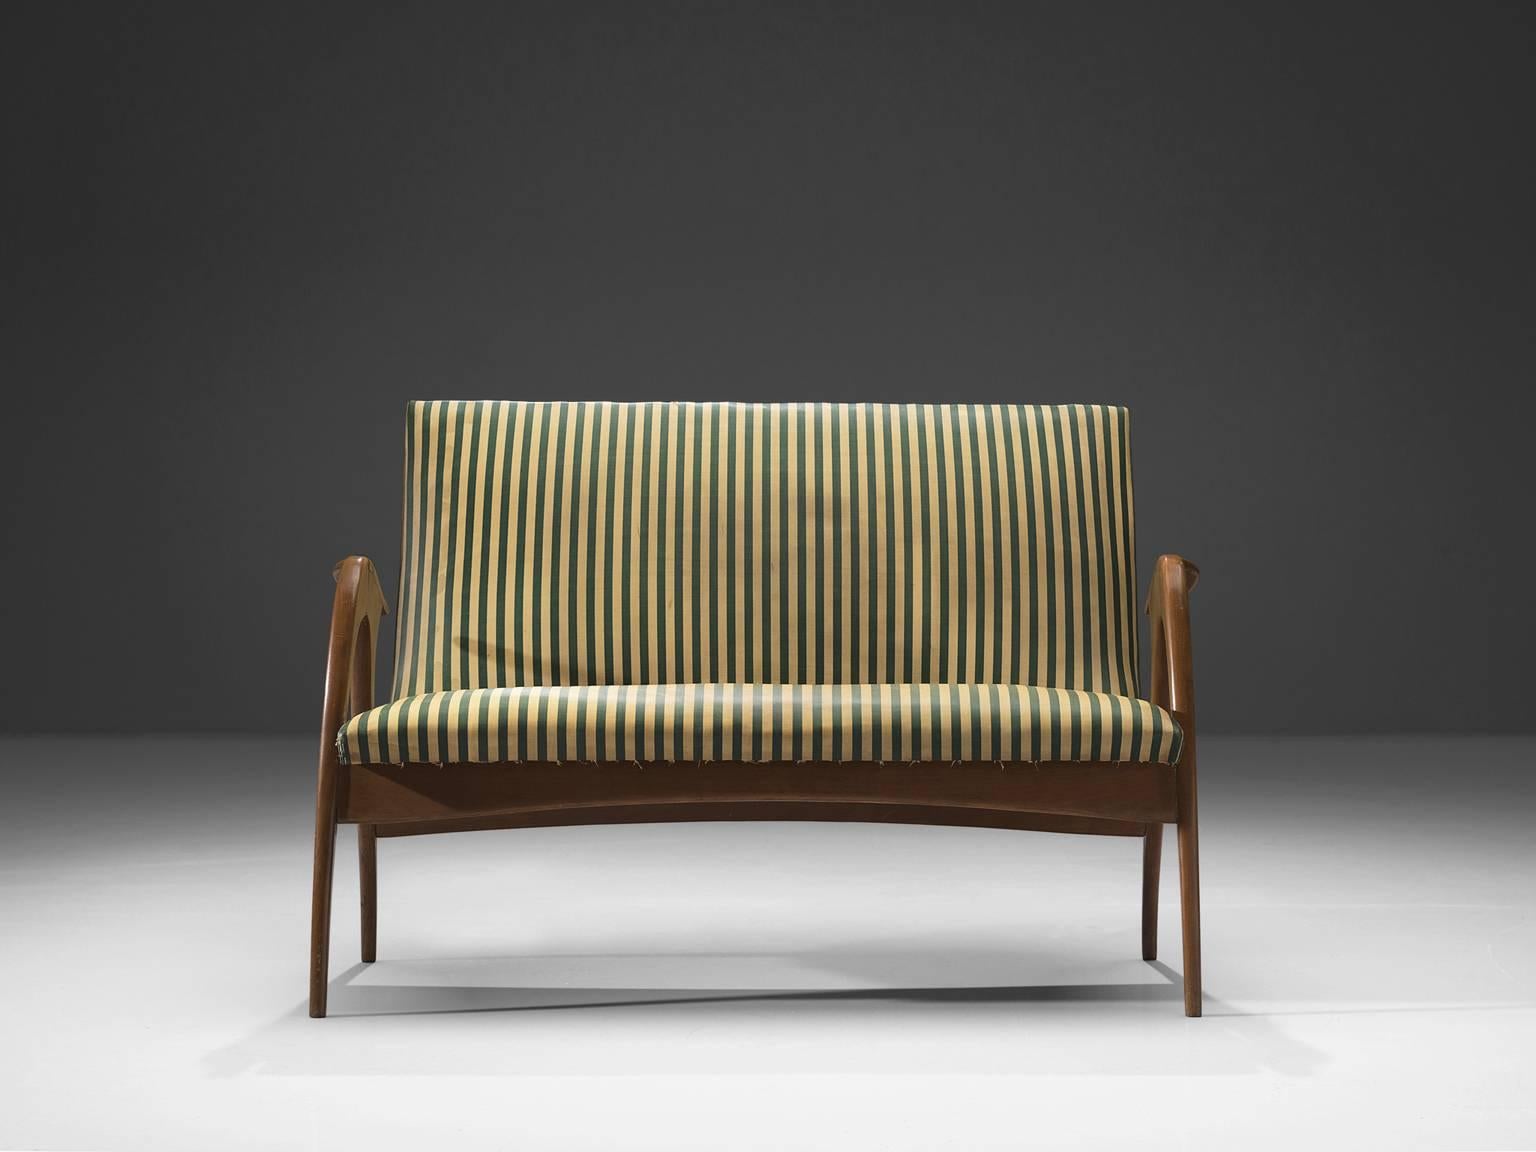 Lacquered Italian Settee with Sculptural Frame by Malatesta & Mason